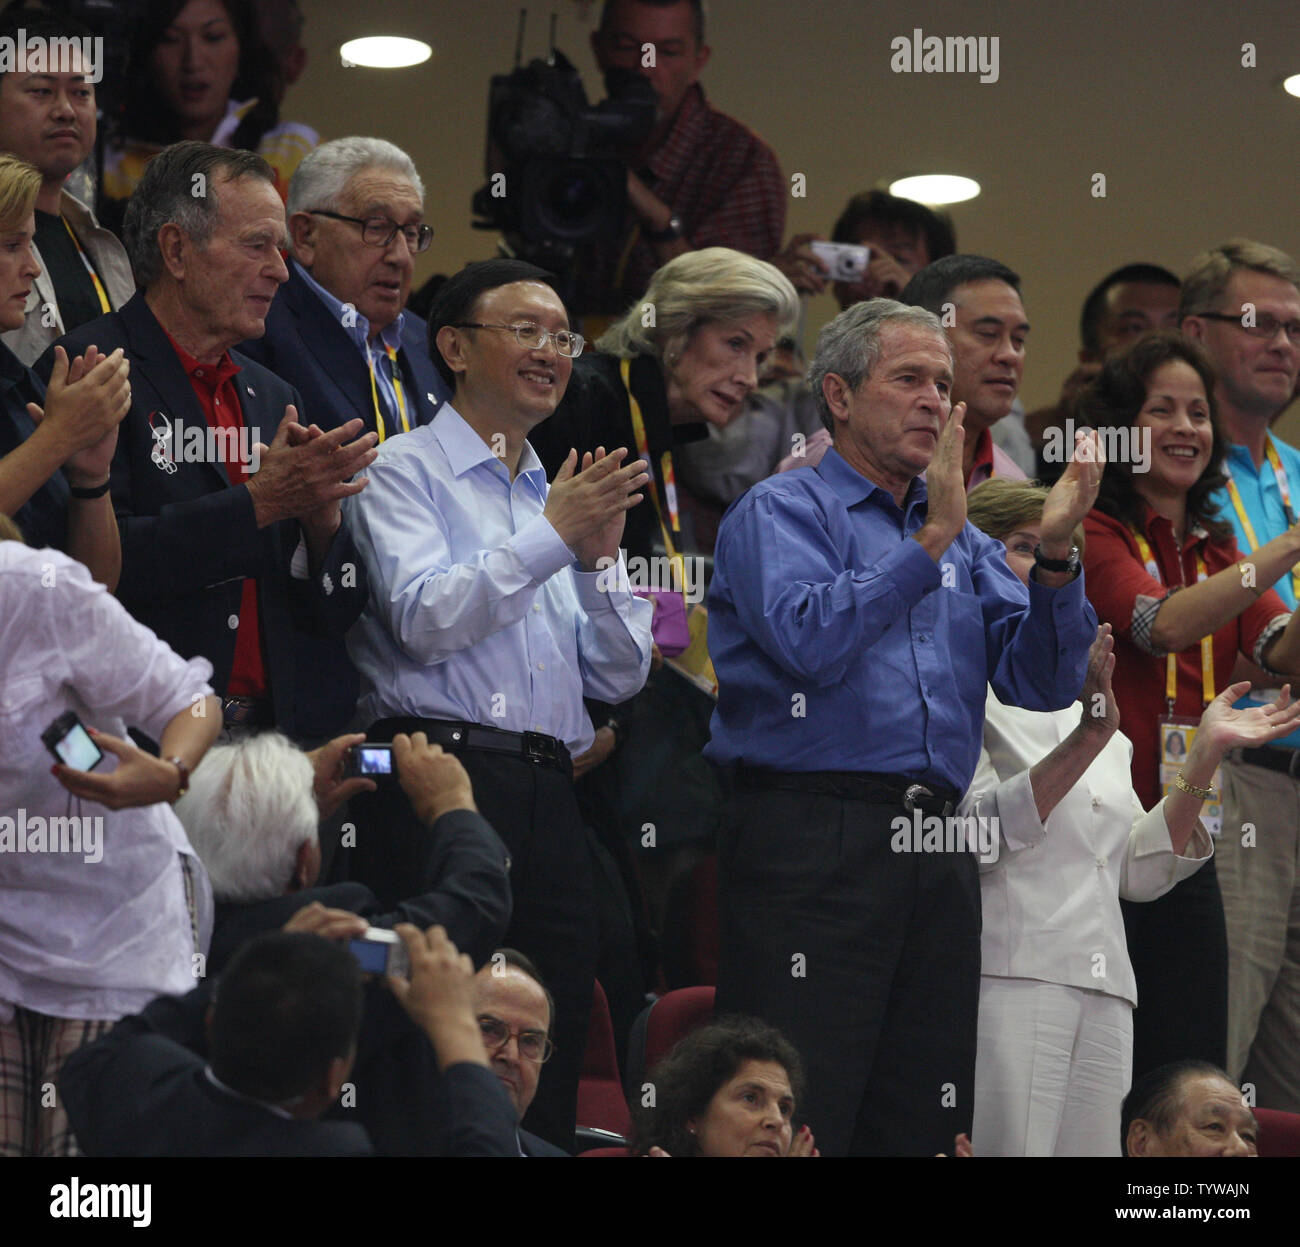 Former President Bush, Henry Kissinger, Chinese Foreign Minister Yang Jiechi and President George Bush applaud as the USA basketball team enters to play China at the 2008 Olympics in Beijing on August 10, 2008.  (UPI Photo/Terry Schmitt) Stock Photo